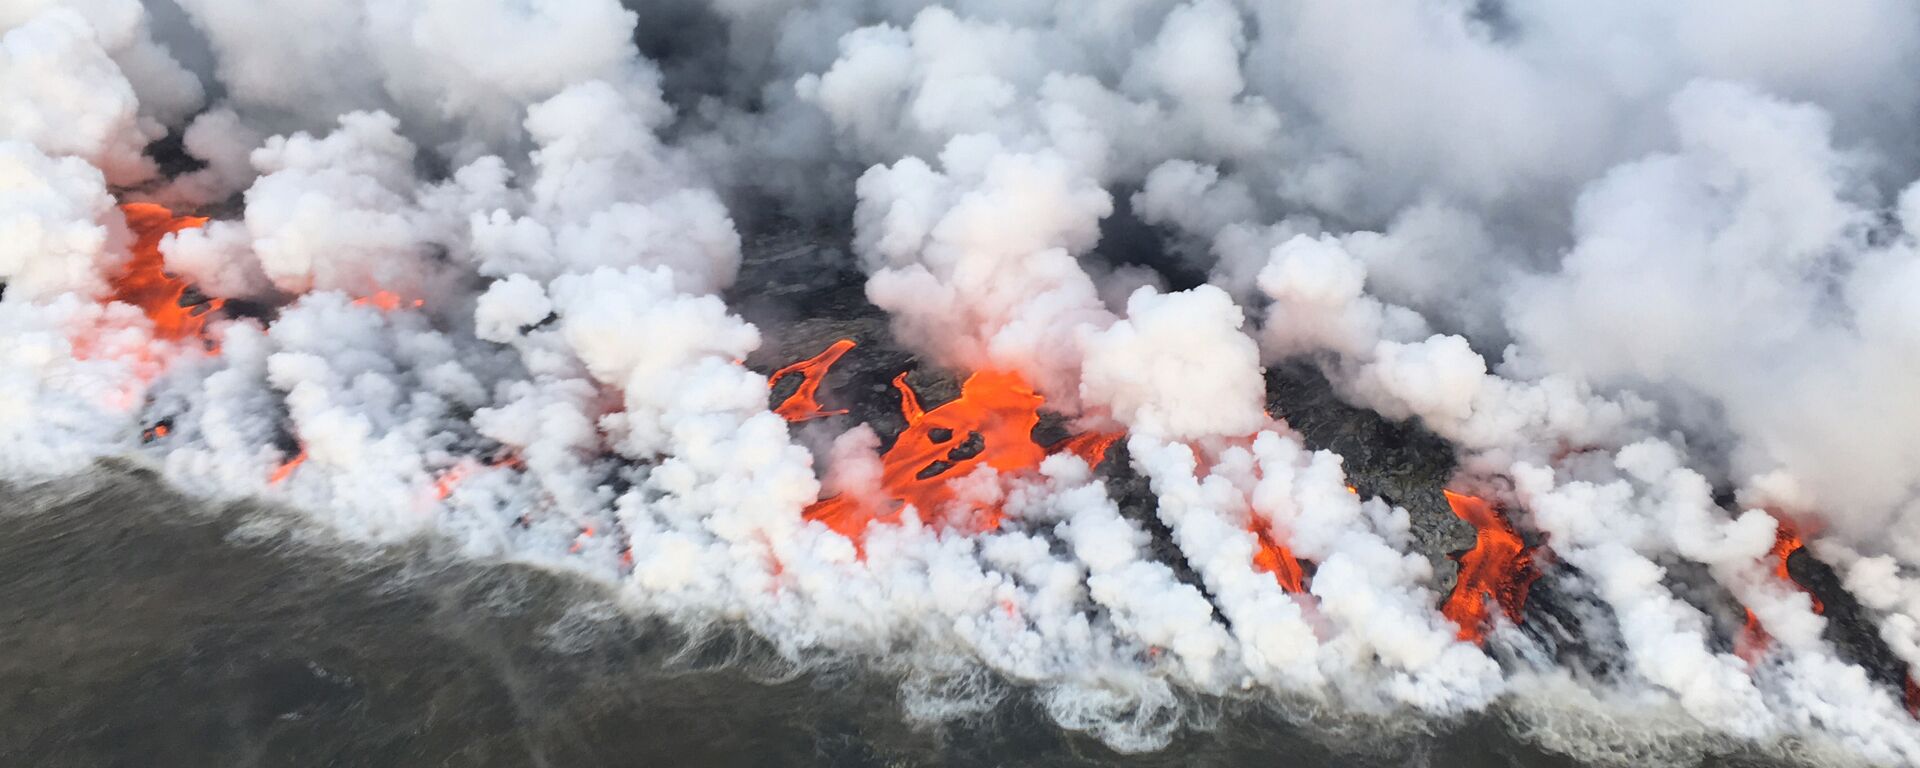 This image obtained June 26, 2018 from the US Geological Survey shows the lava entering the sea and releasing multiple laze plumes at Kilauea Volcano, Hawaii - Sputnik International, 1920, 21.12.2020